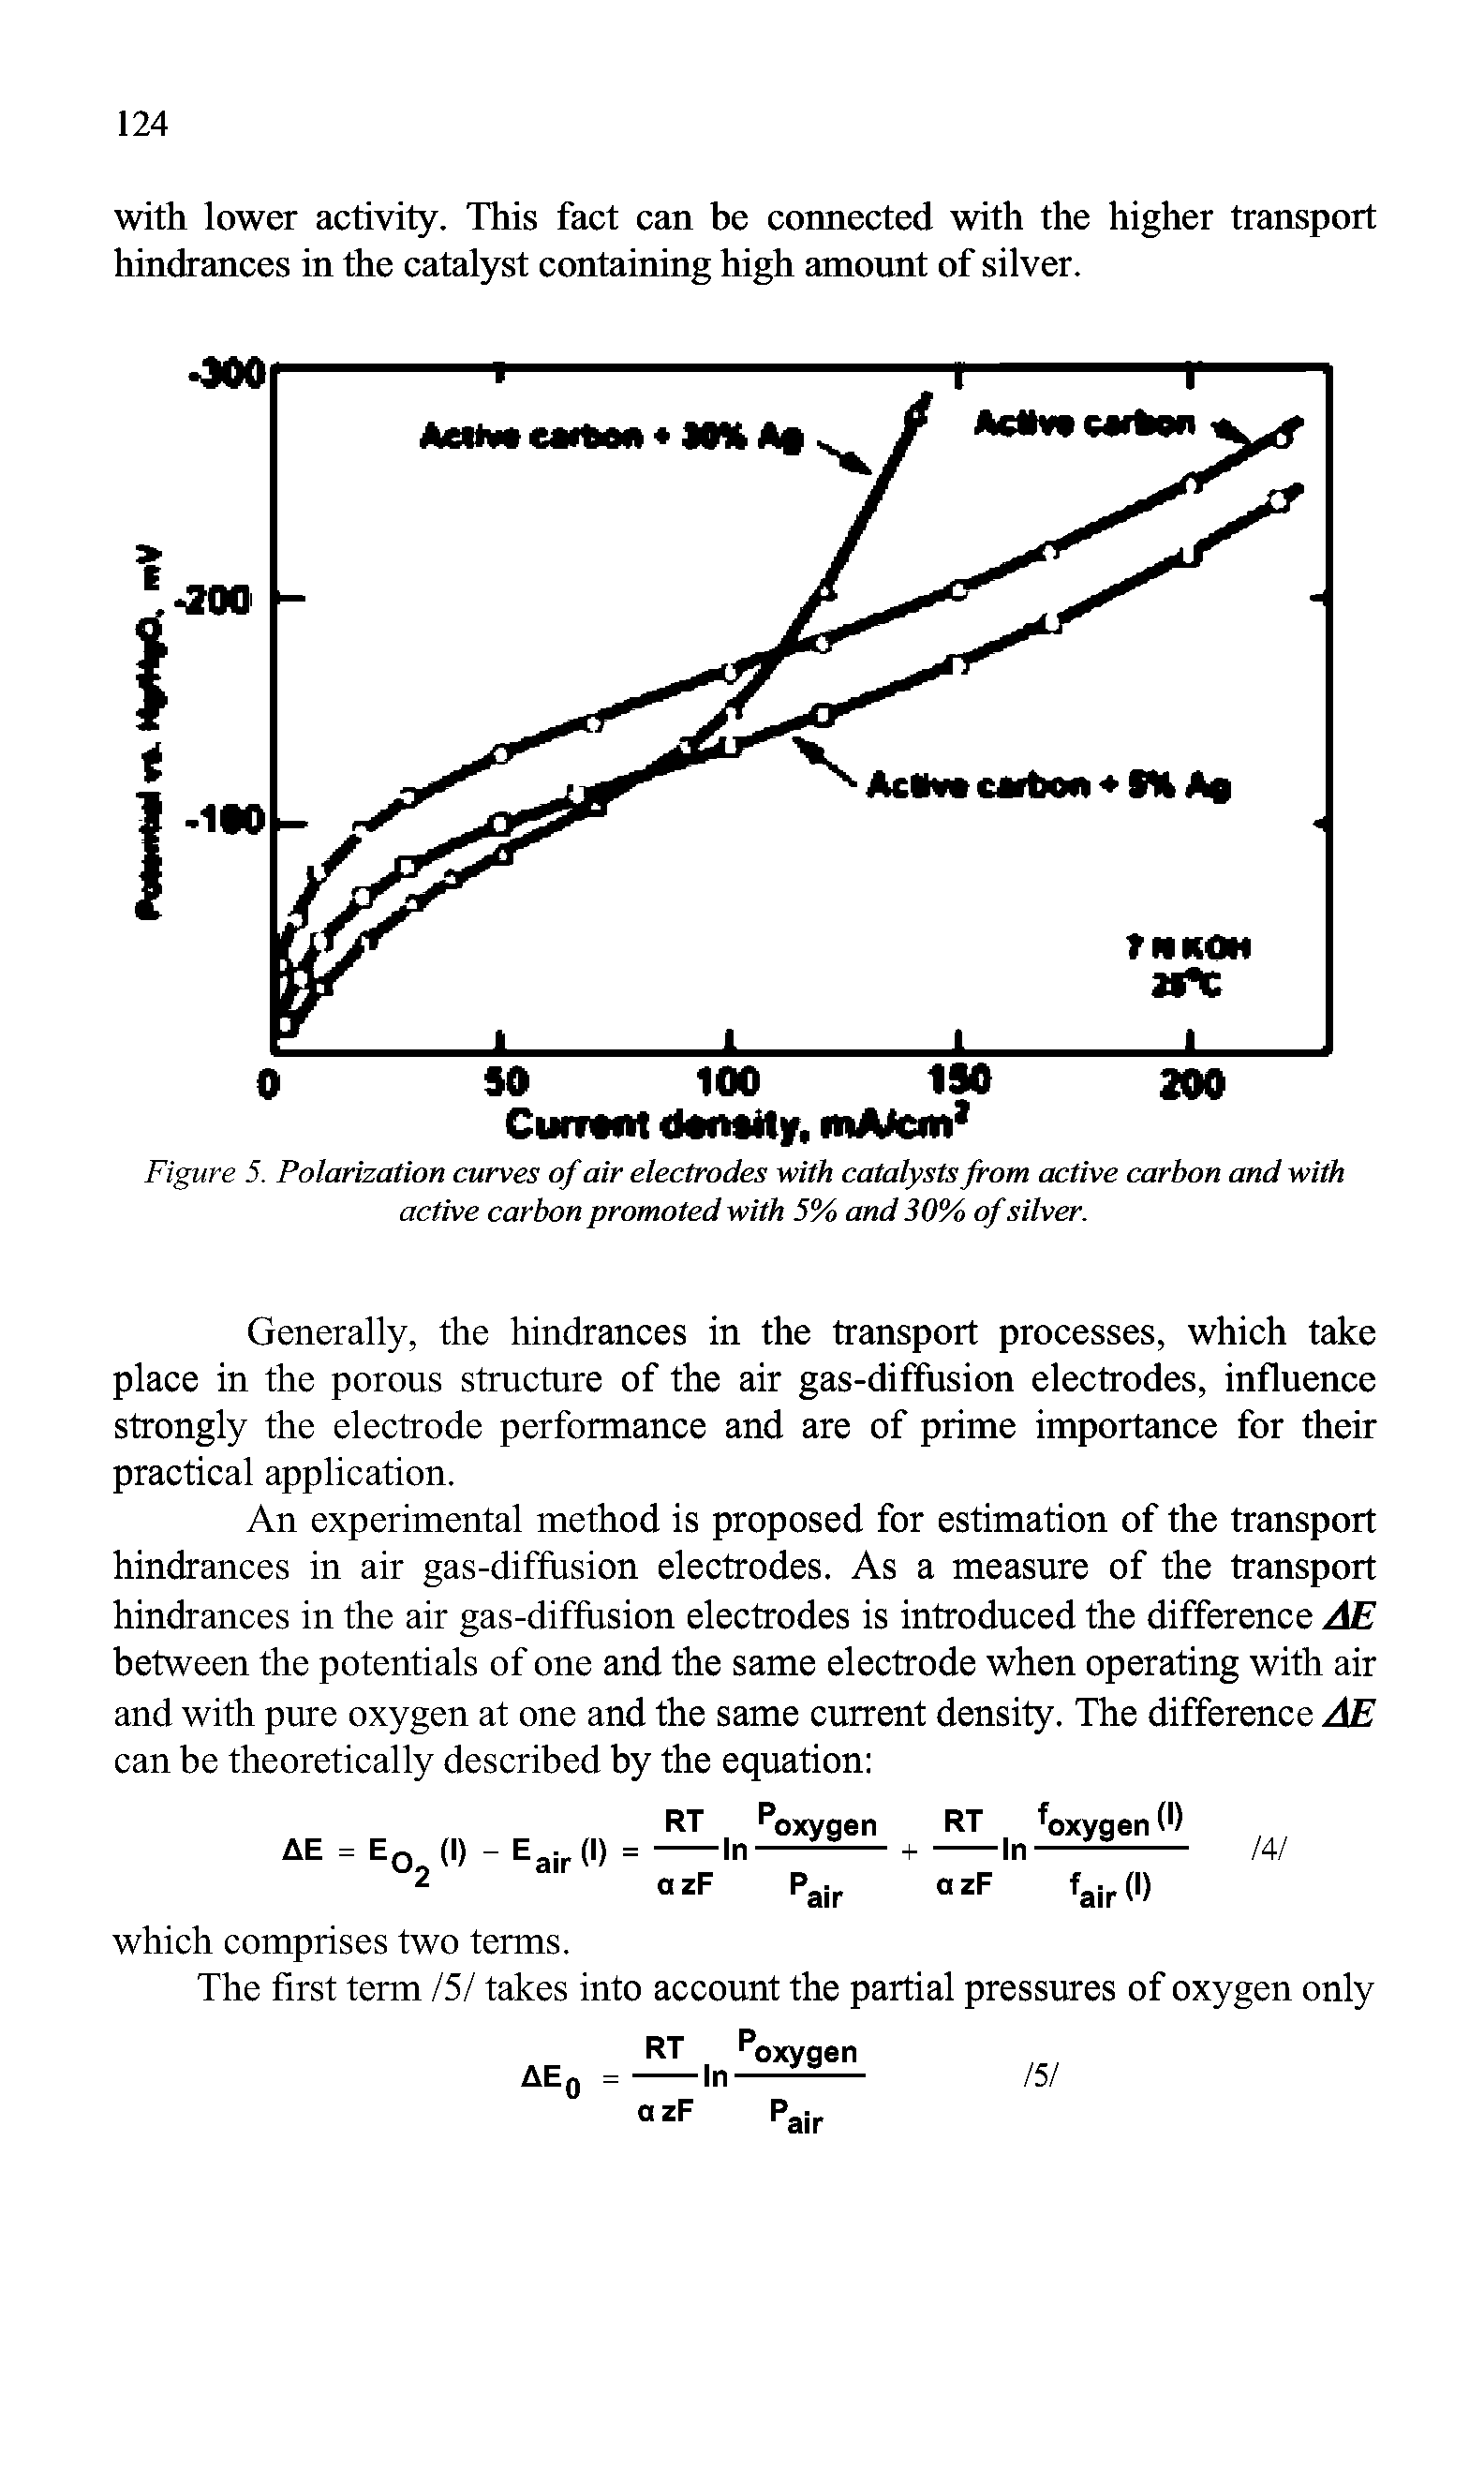 Figure 5. Polarization curves of air electrodes with catalysts from active carbon and with active carbon promoted with 5% and 30% of silver.